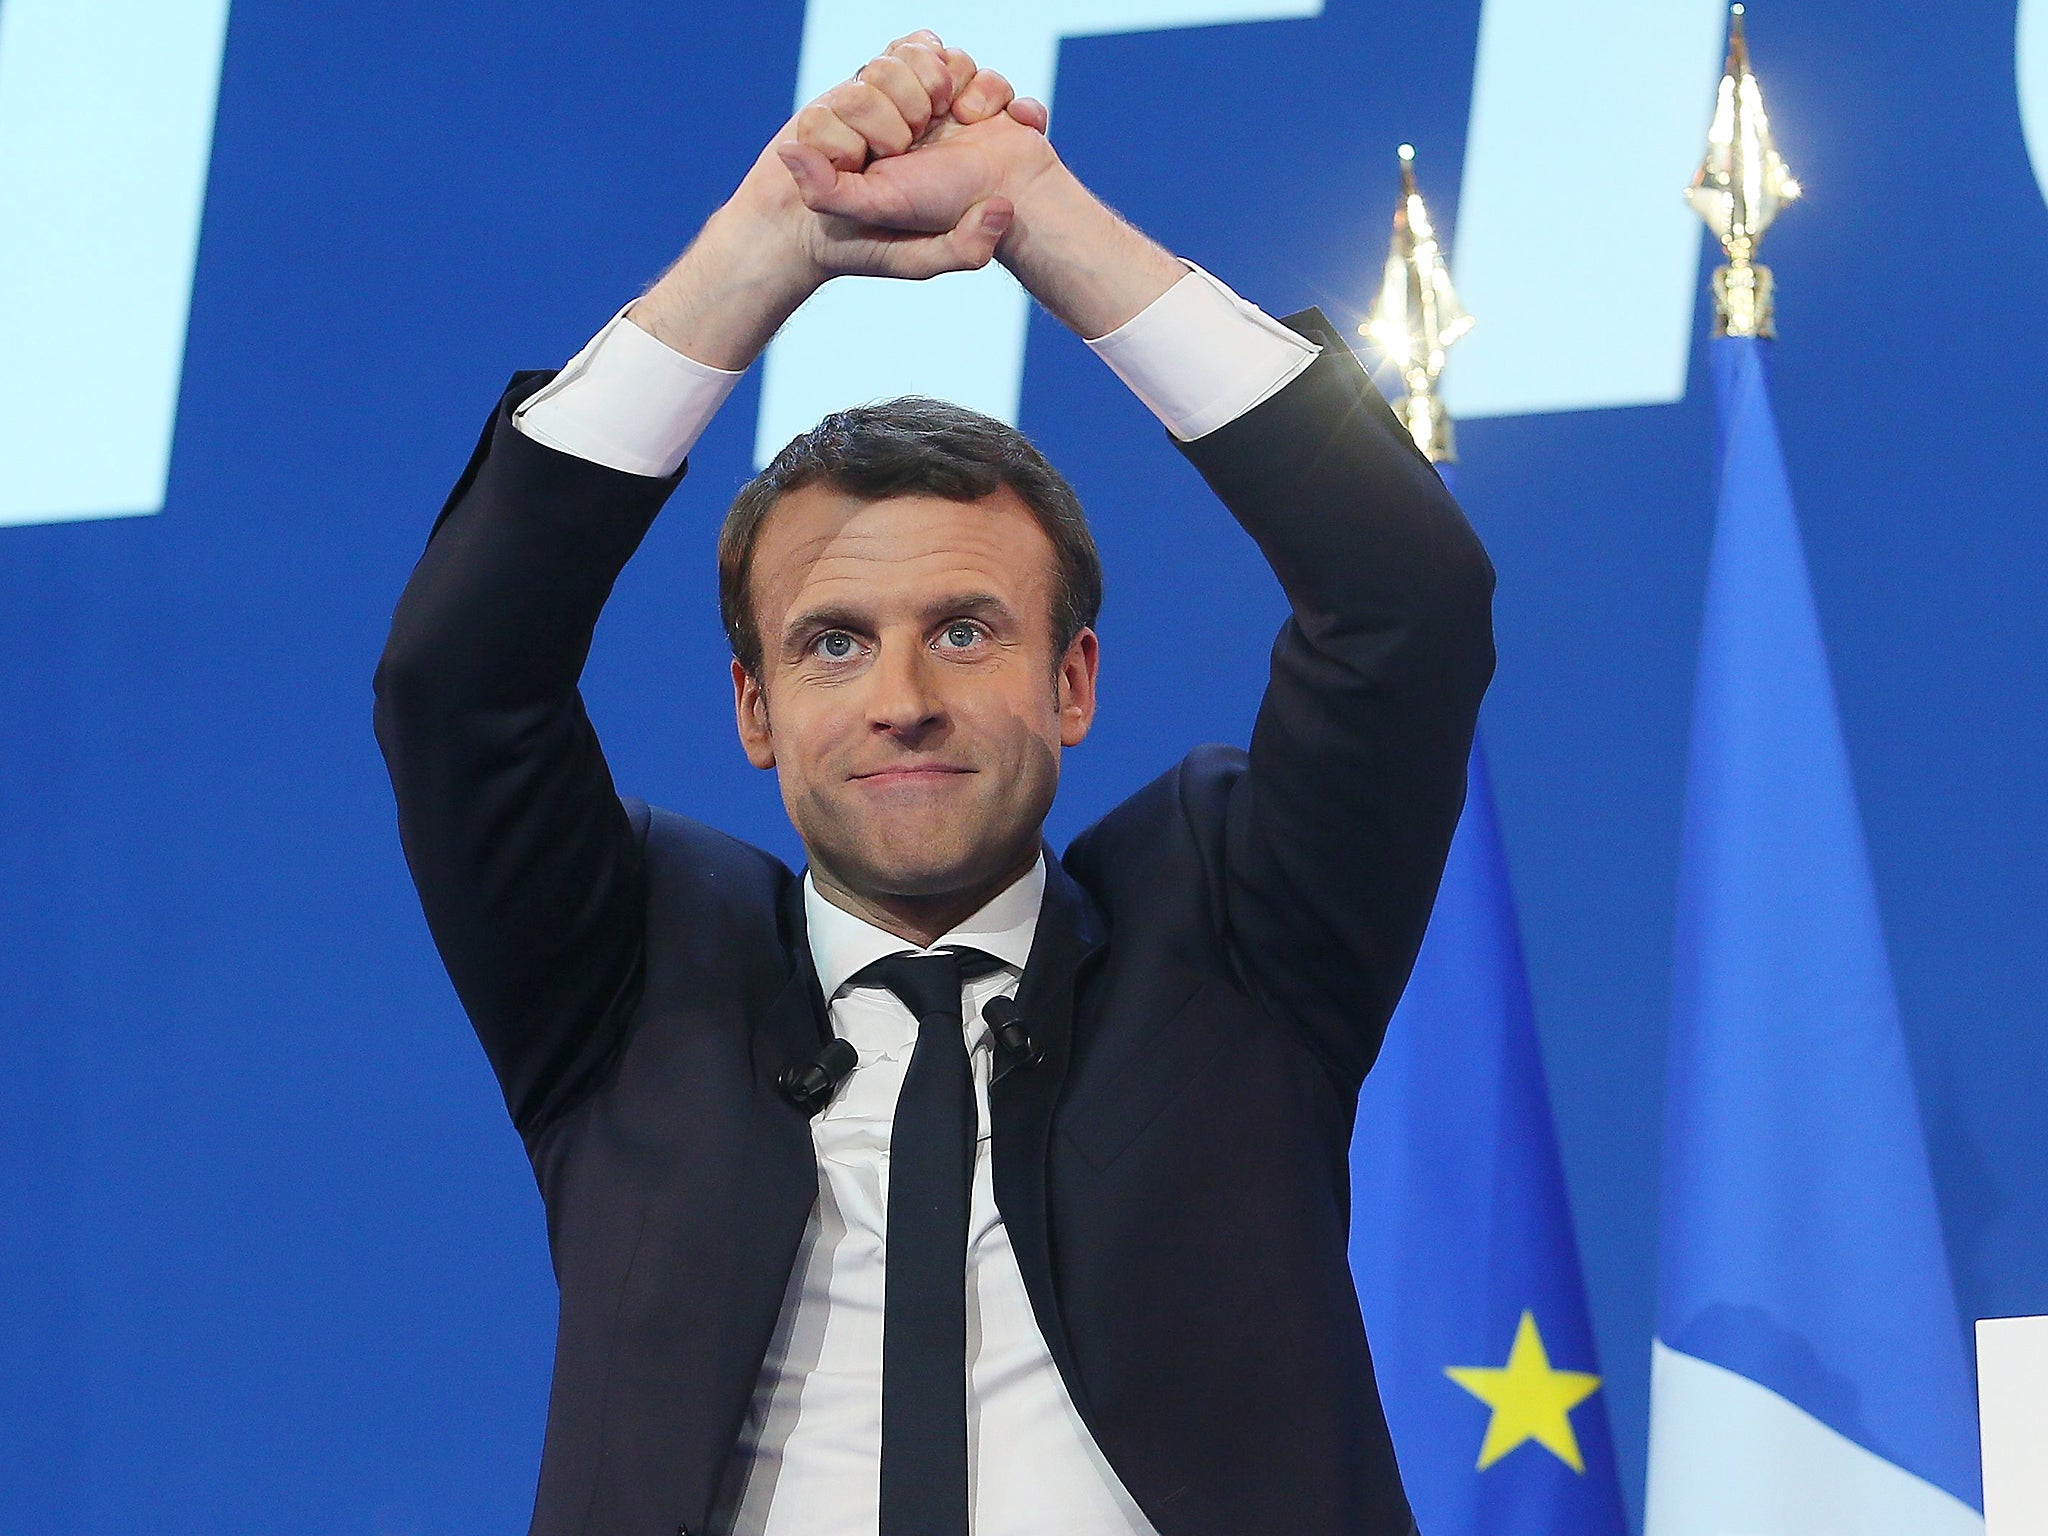 Emmanuel Macron won the first round of the French presidential election and now faces Marine Le Pen in the deciding vote